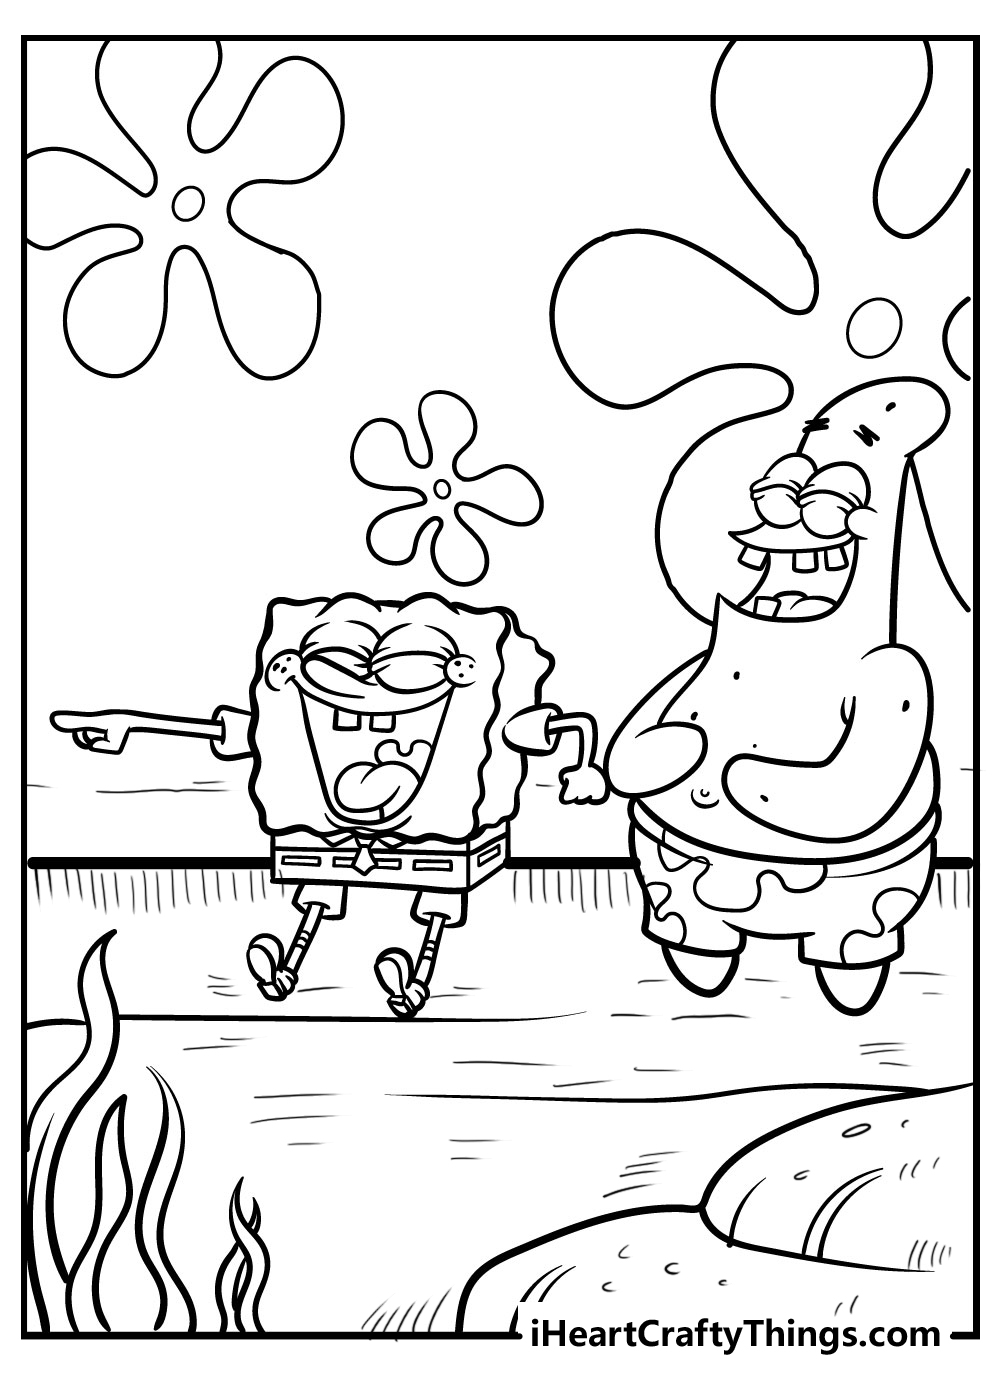 Spongebob And Patrick Jellyfishing Coloring Pages